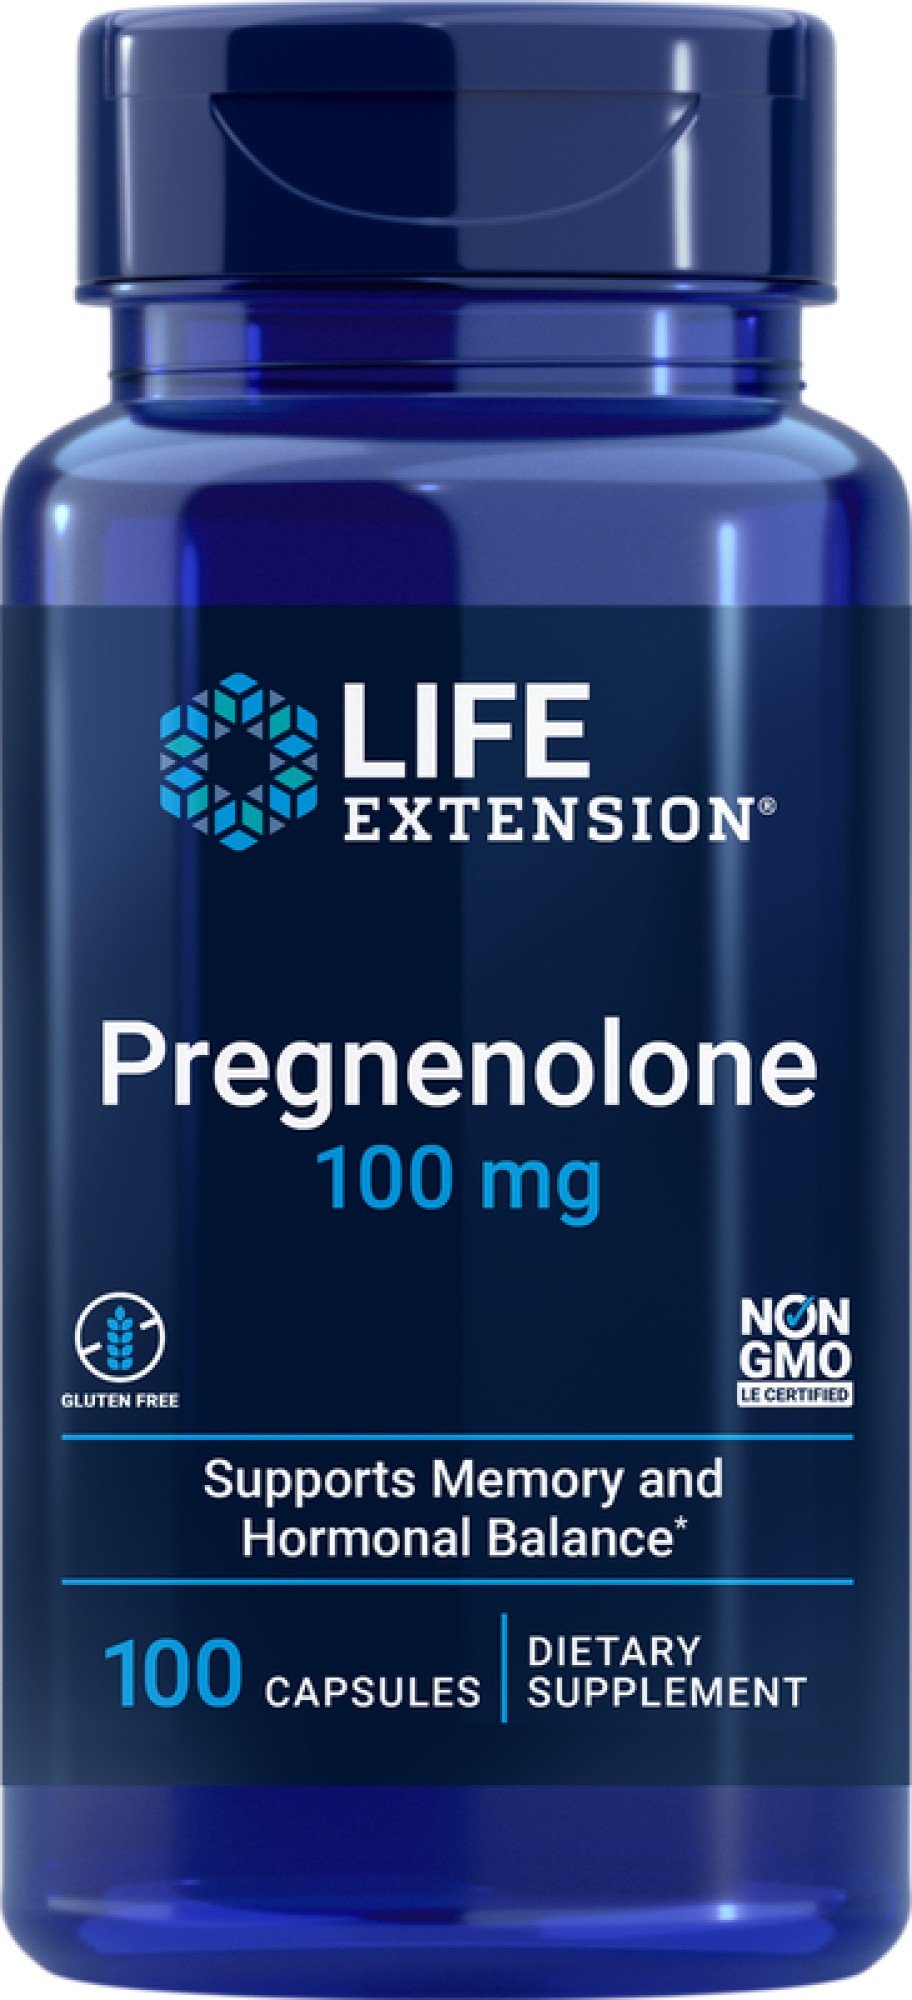 100 milligrams Pregnenolone | Life Extension | Memory Support | Supports Hormonal Balance | Non GMO | Gluten Free | Dietary Supplement | 100 Capsules | VitaminLife